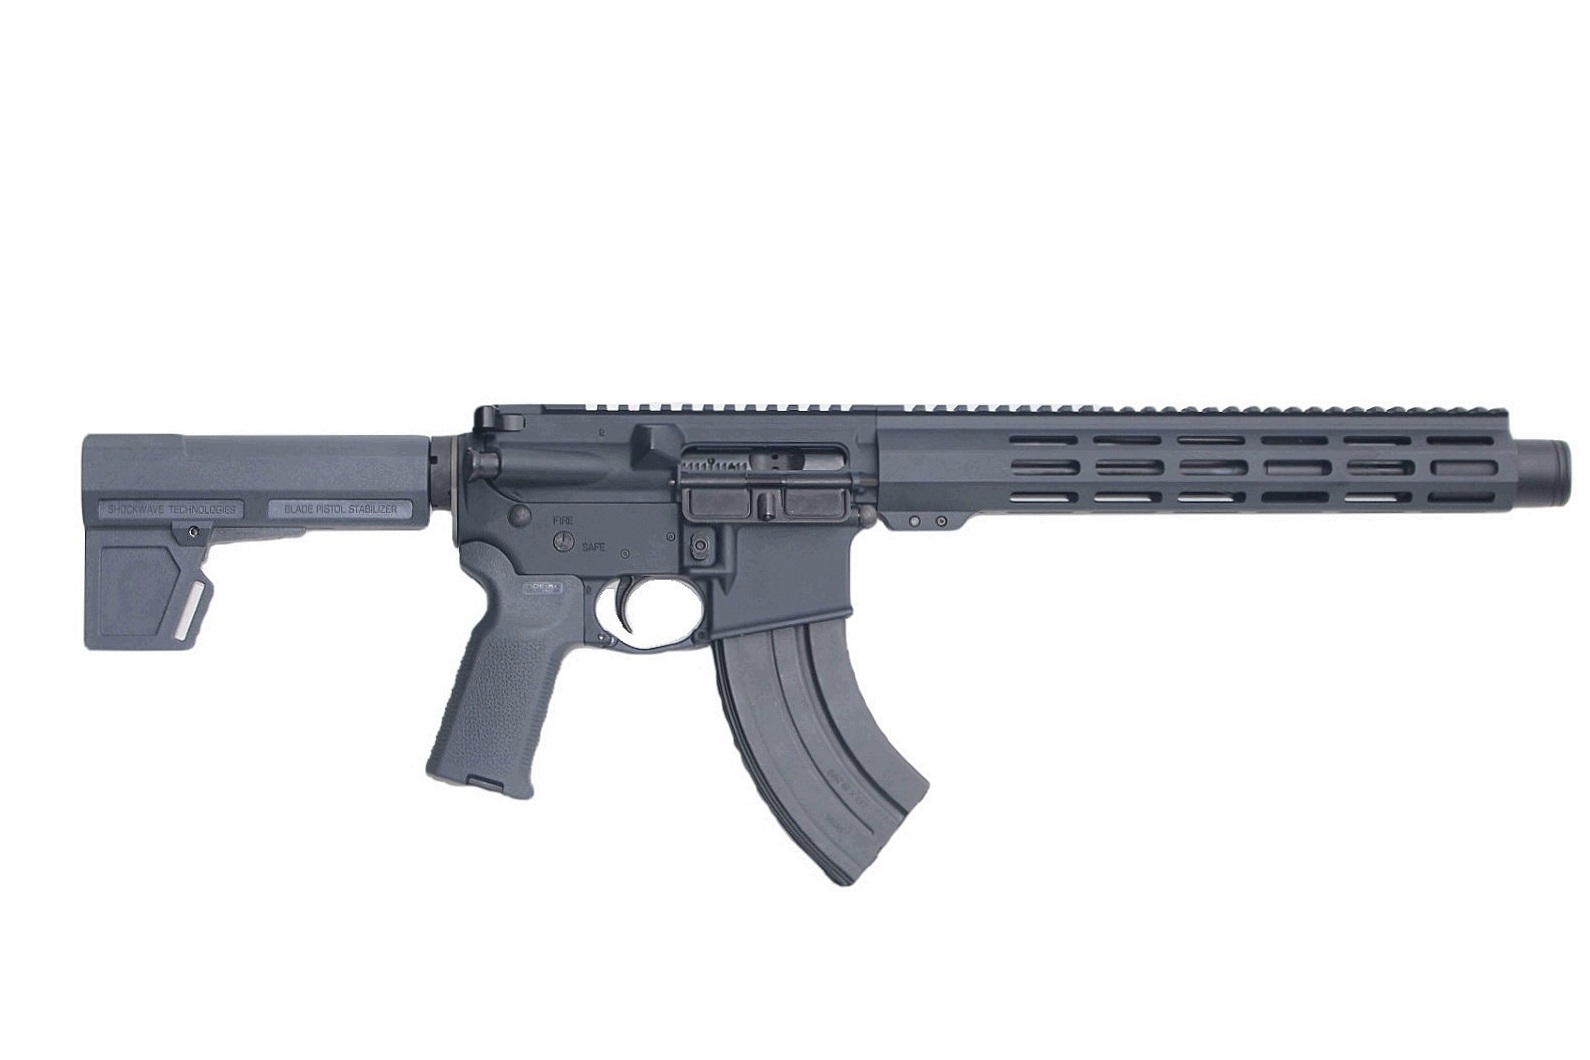 P2A PATRIOT 10.5" 9x39 Russian 1/7 Pistol Length Melonite M-LOK Pistol with Flash Can - GRAY